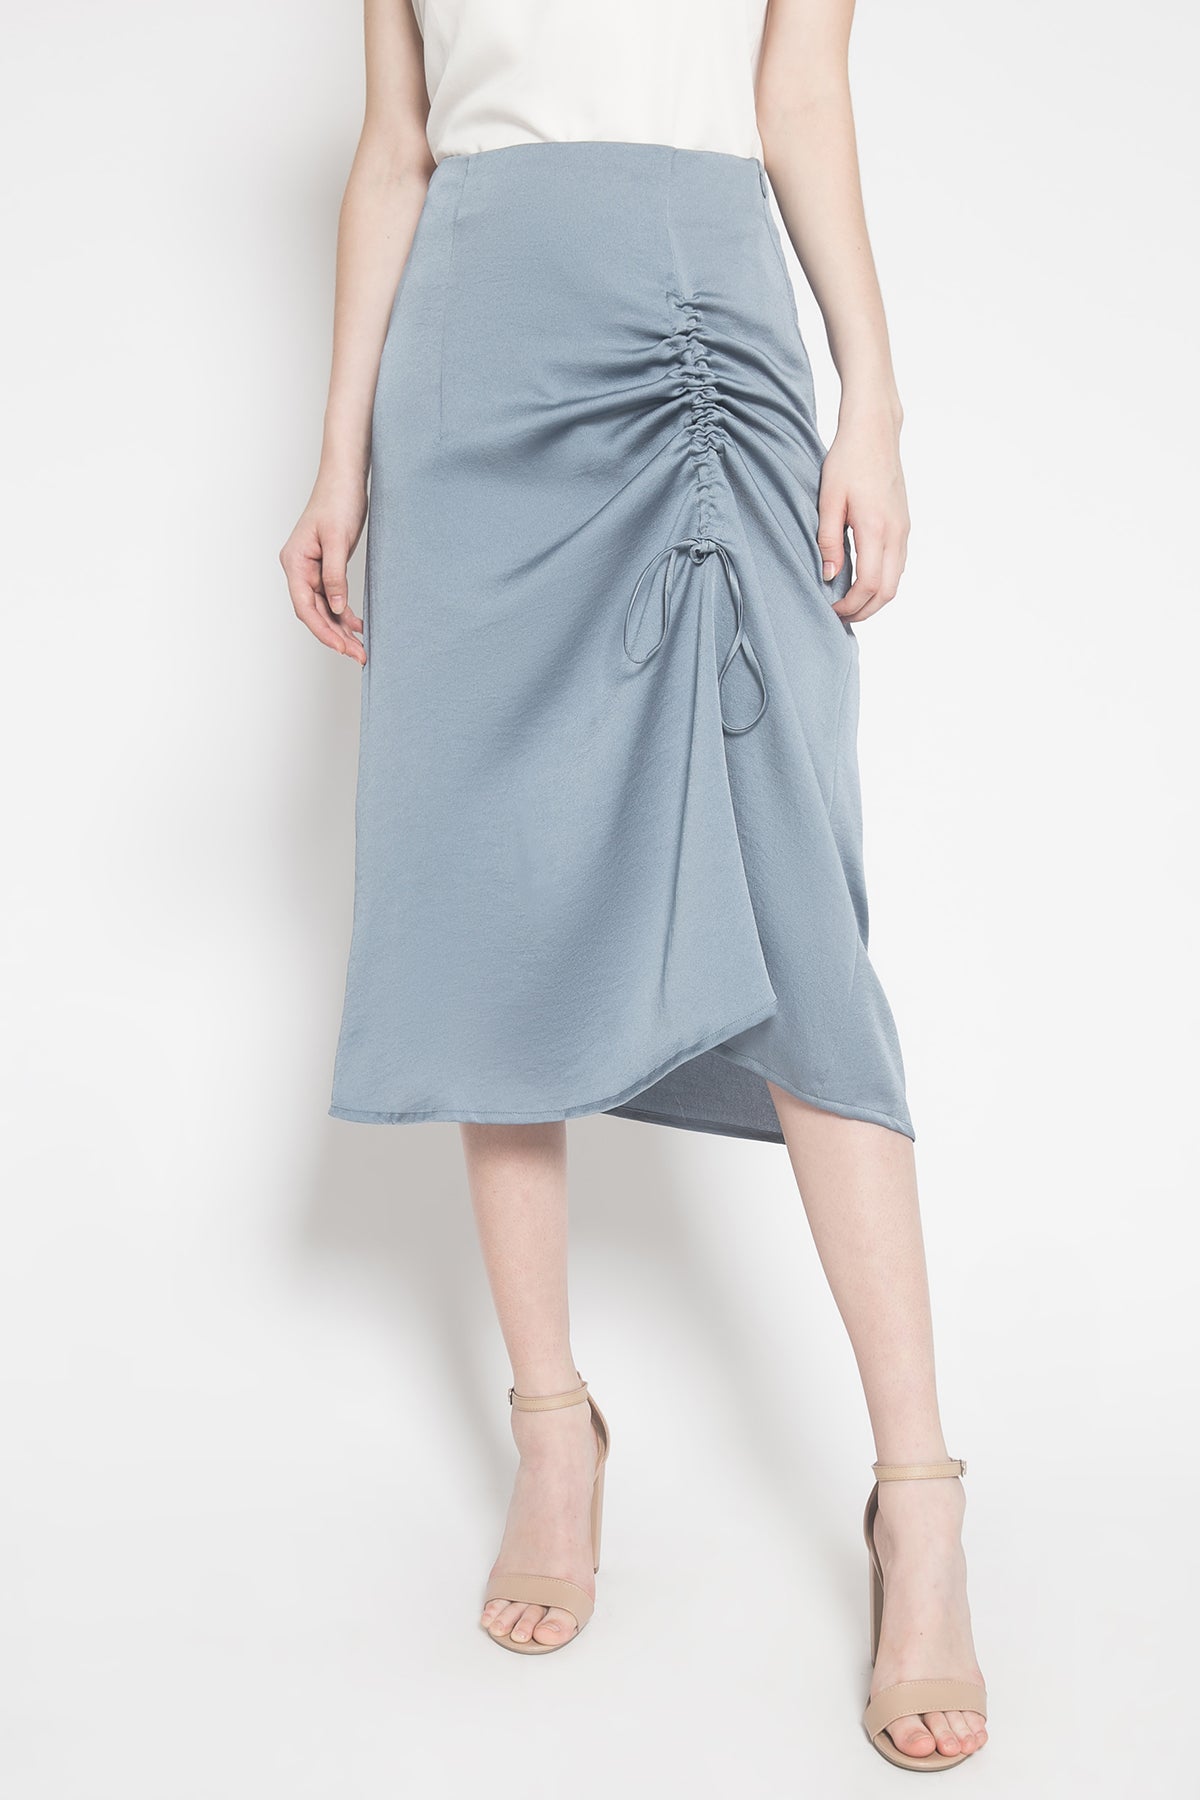 Up Front Skirt in Greyish Baby Blue